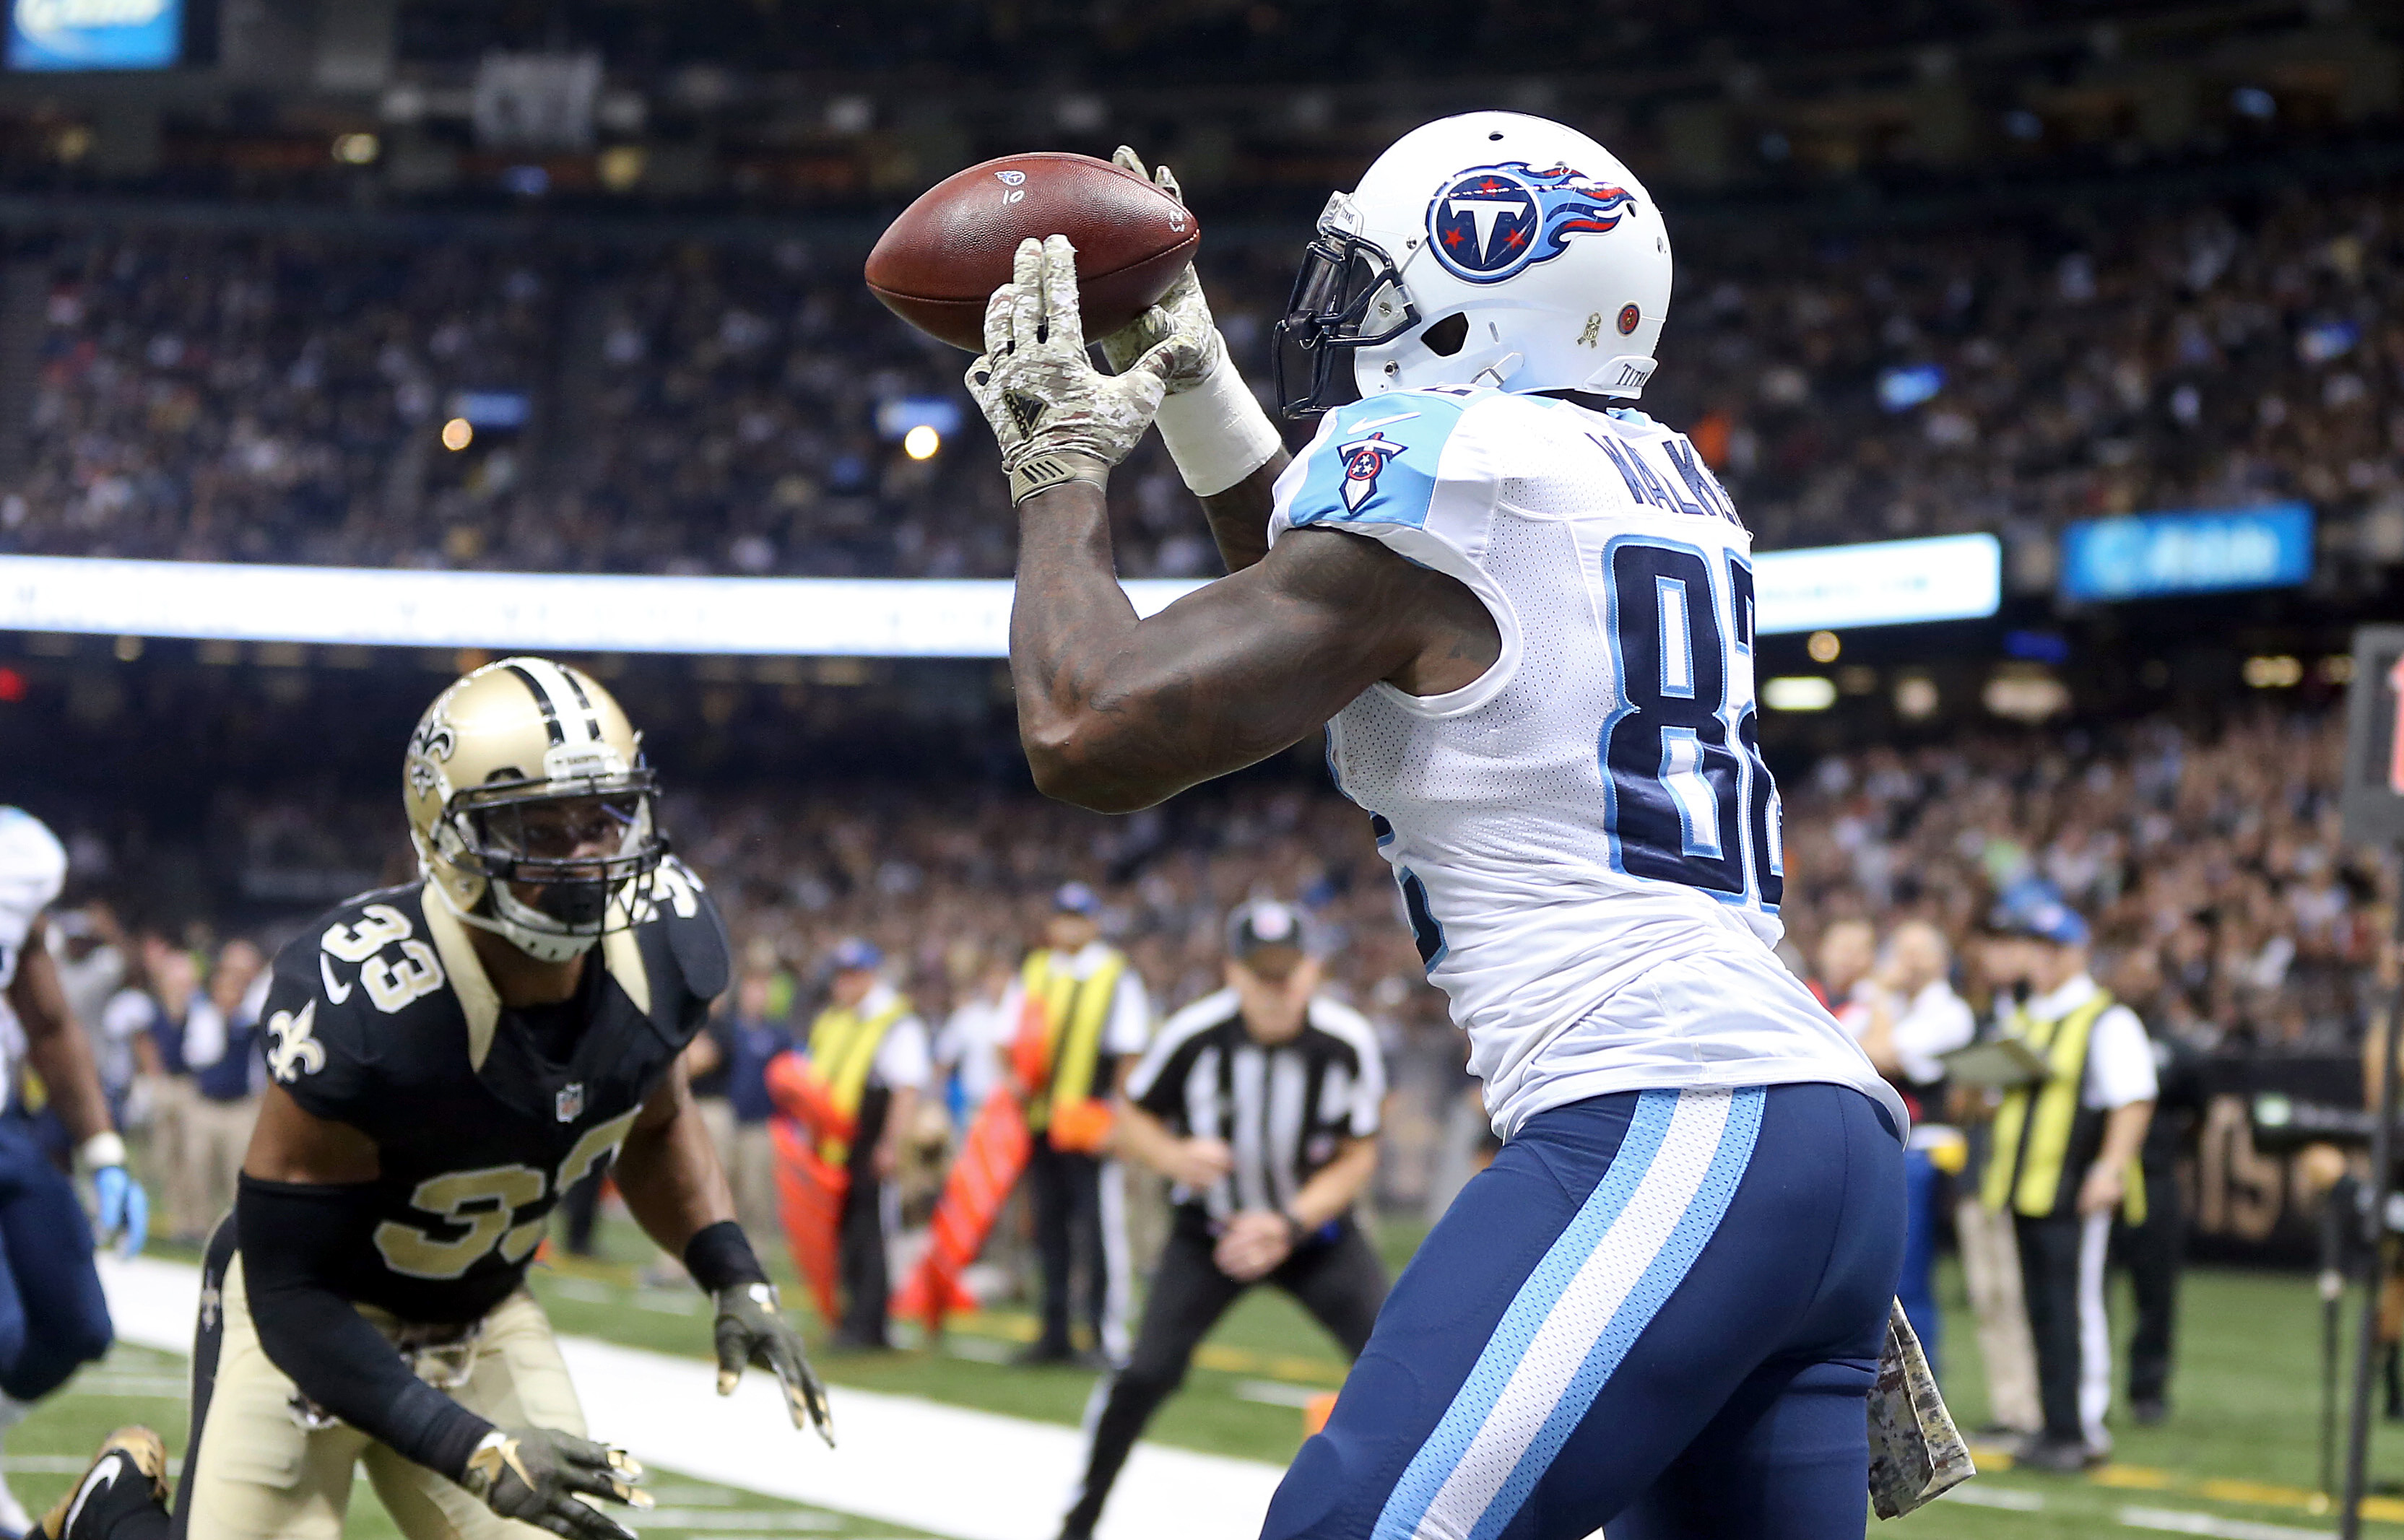 Saints lose in overtime 34-28 to Titans